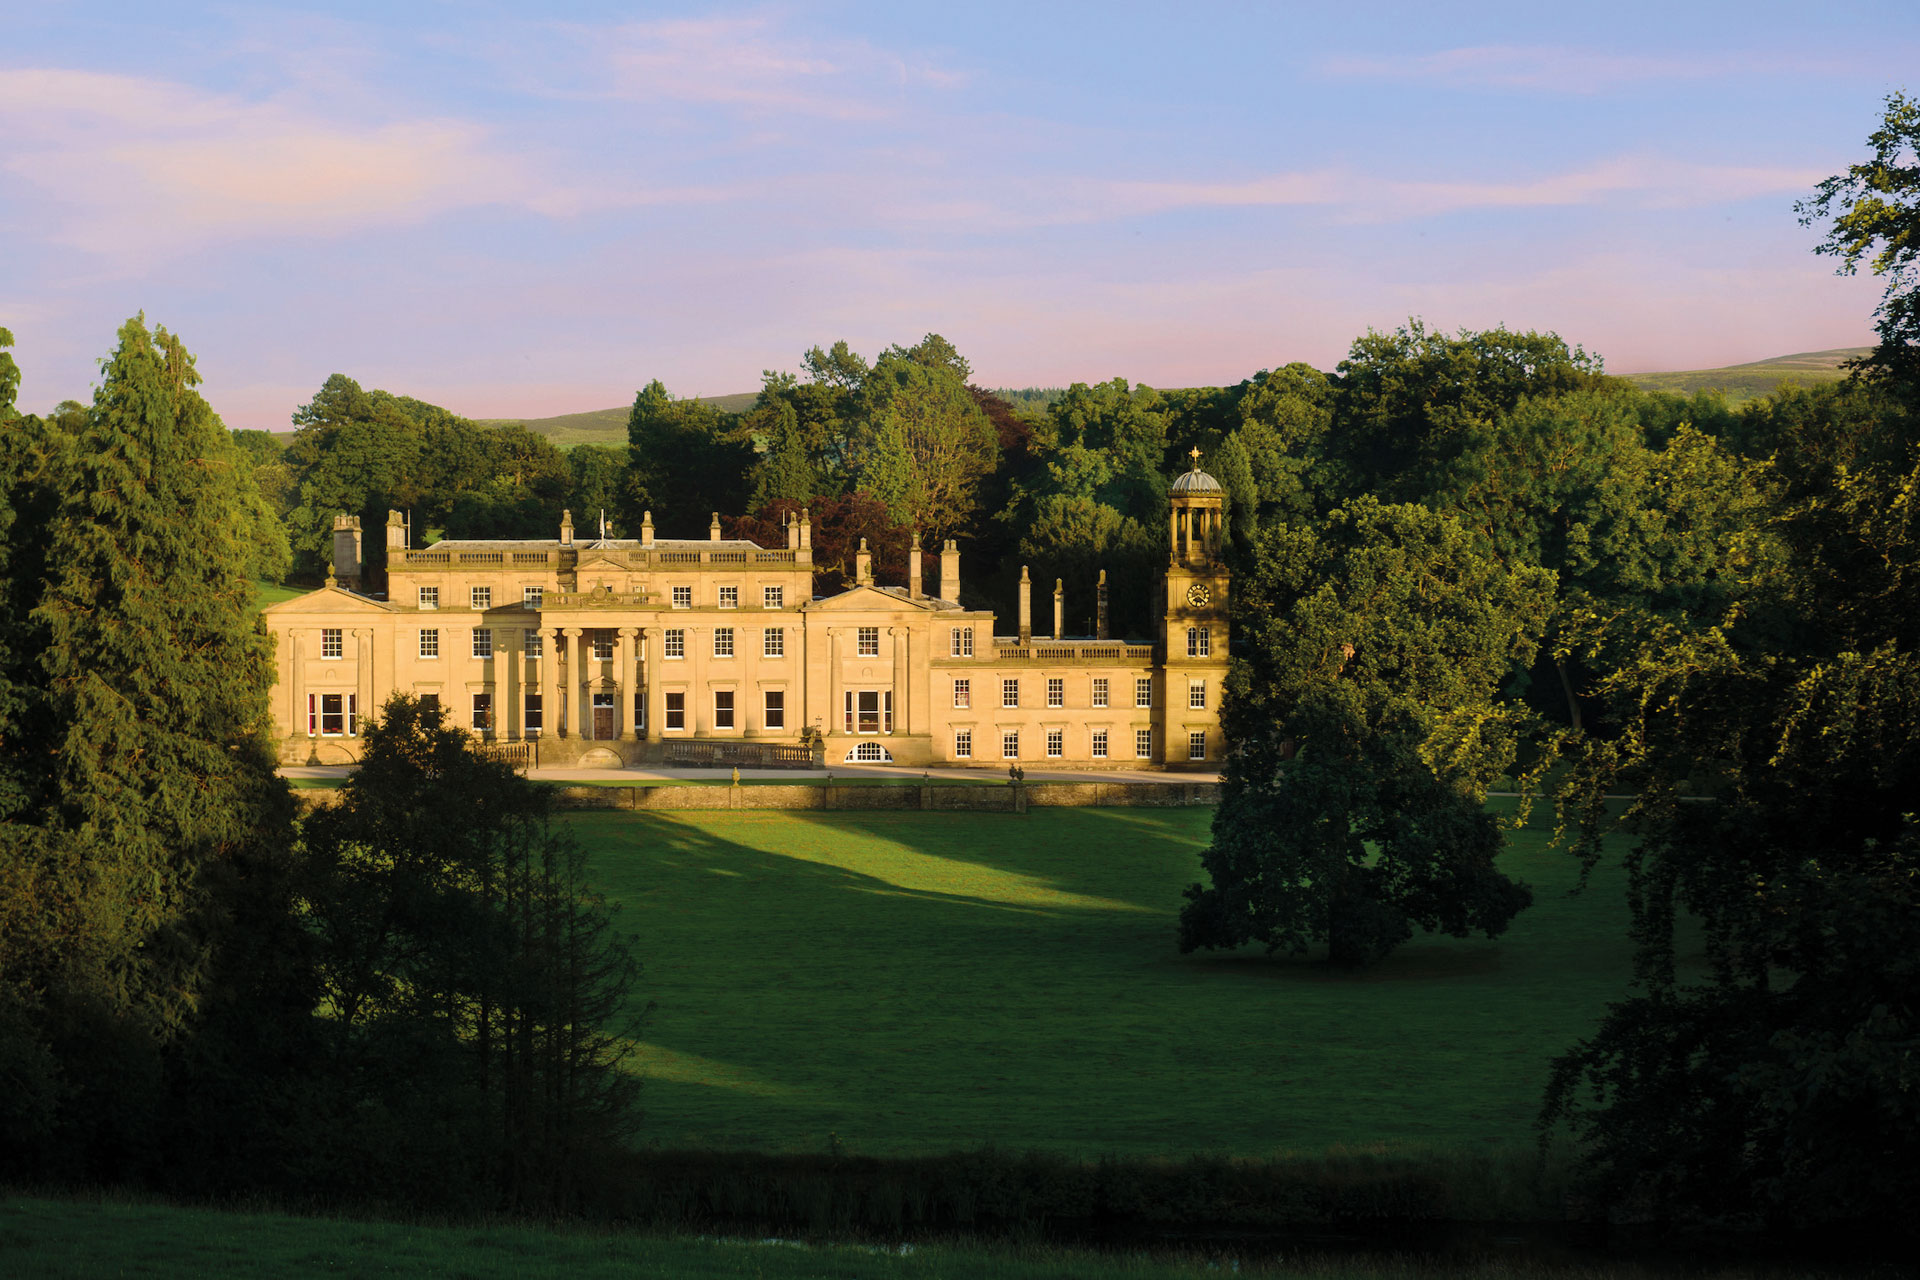 Broughton Hall and its large estate